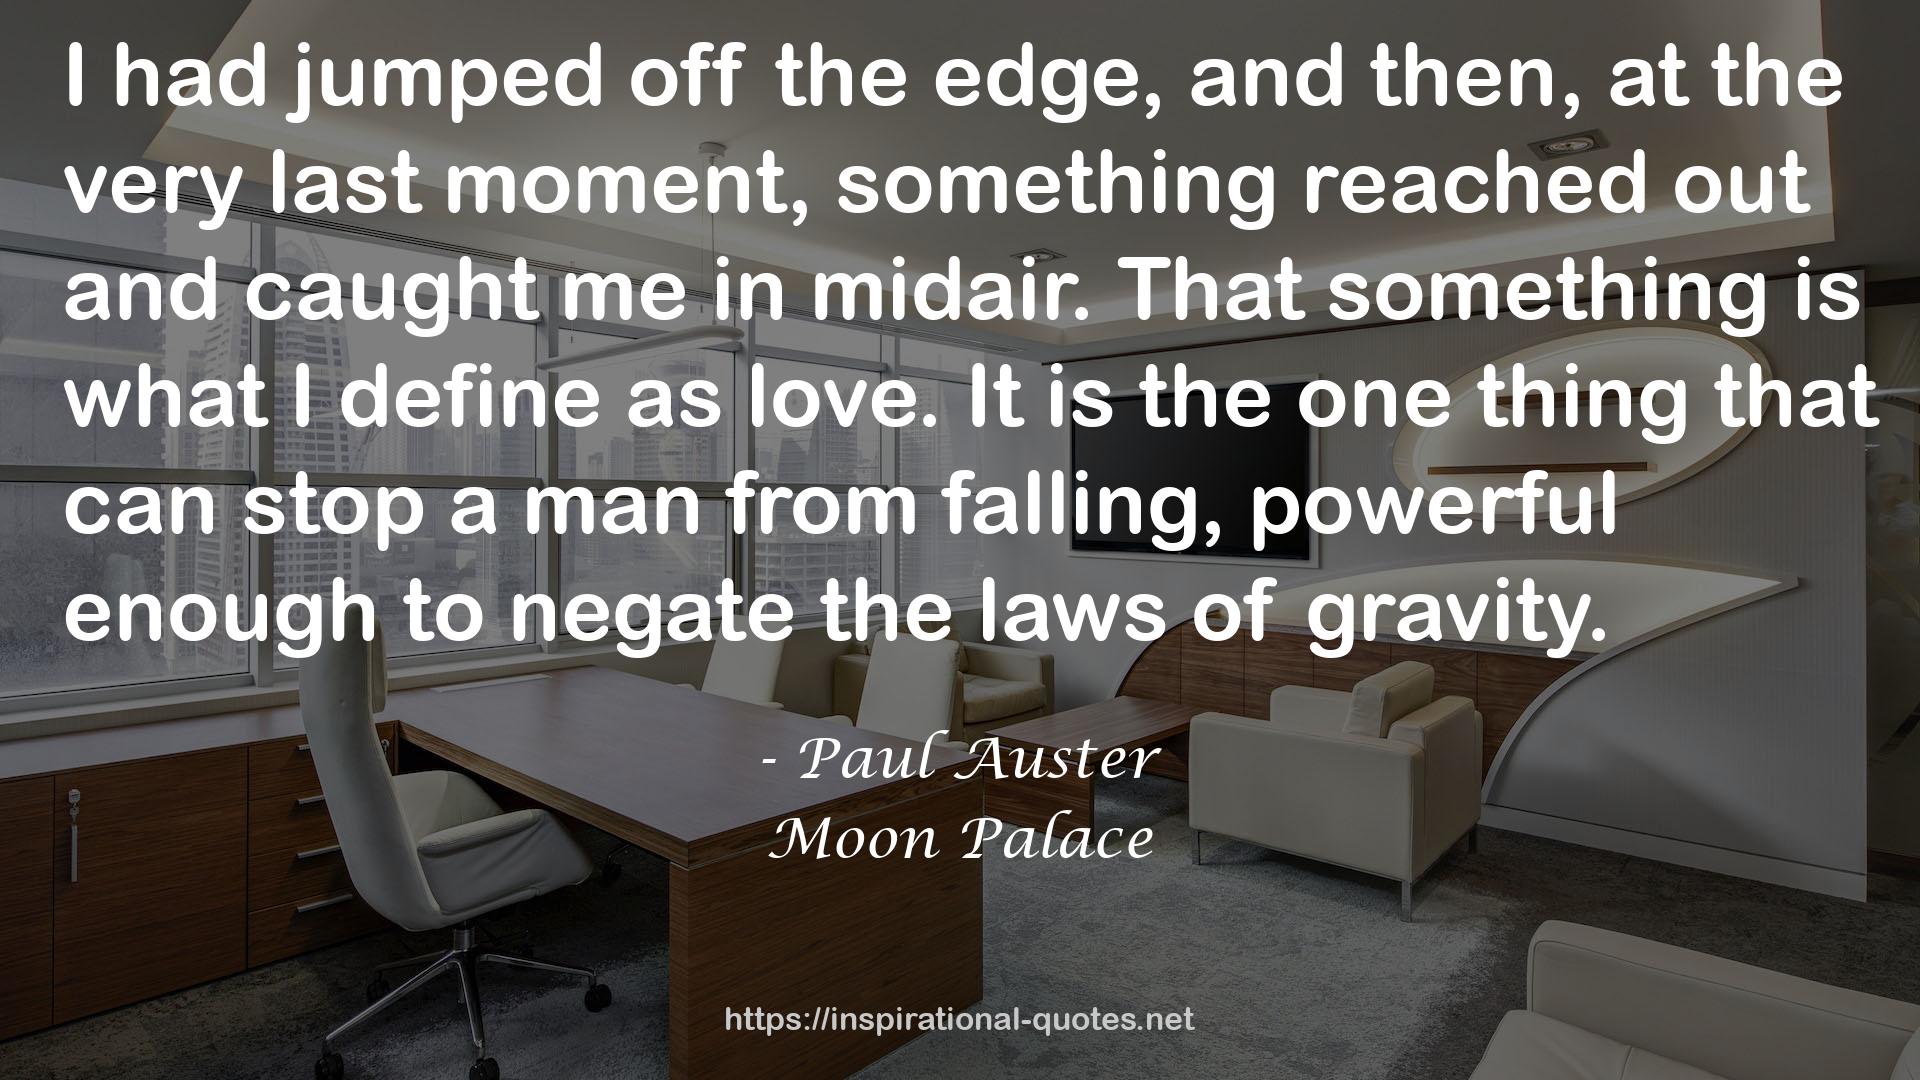 Moon Palace QUOTES